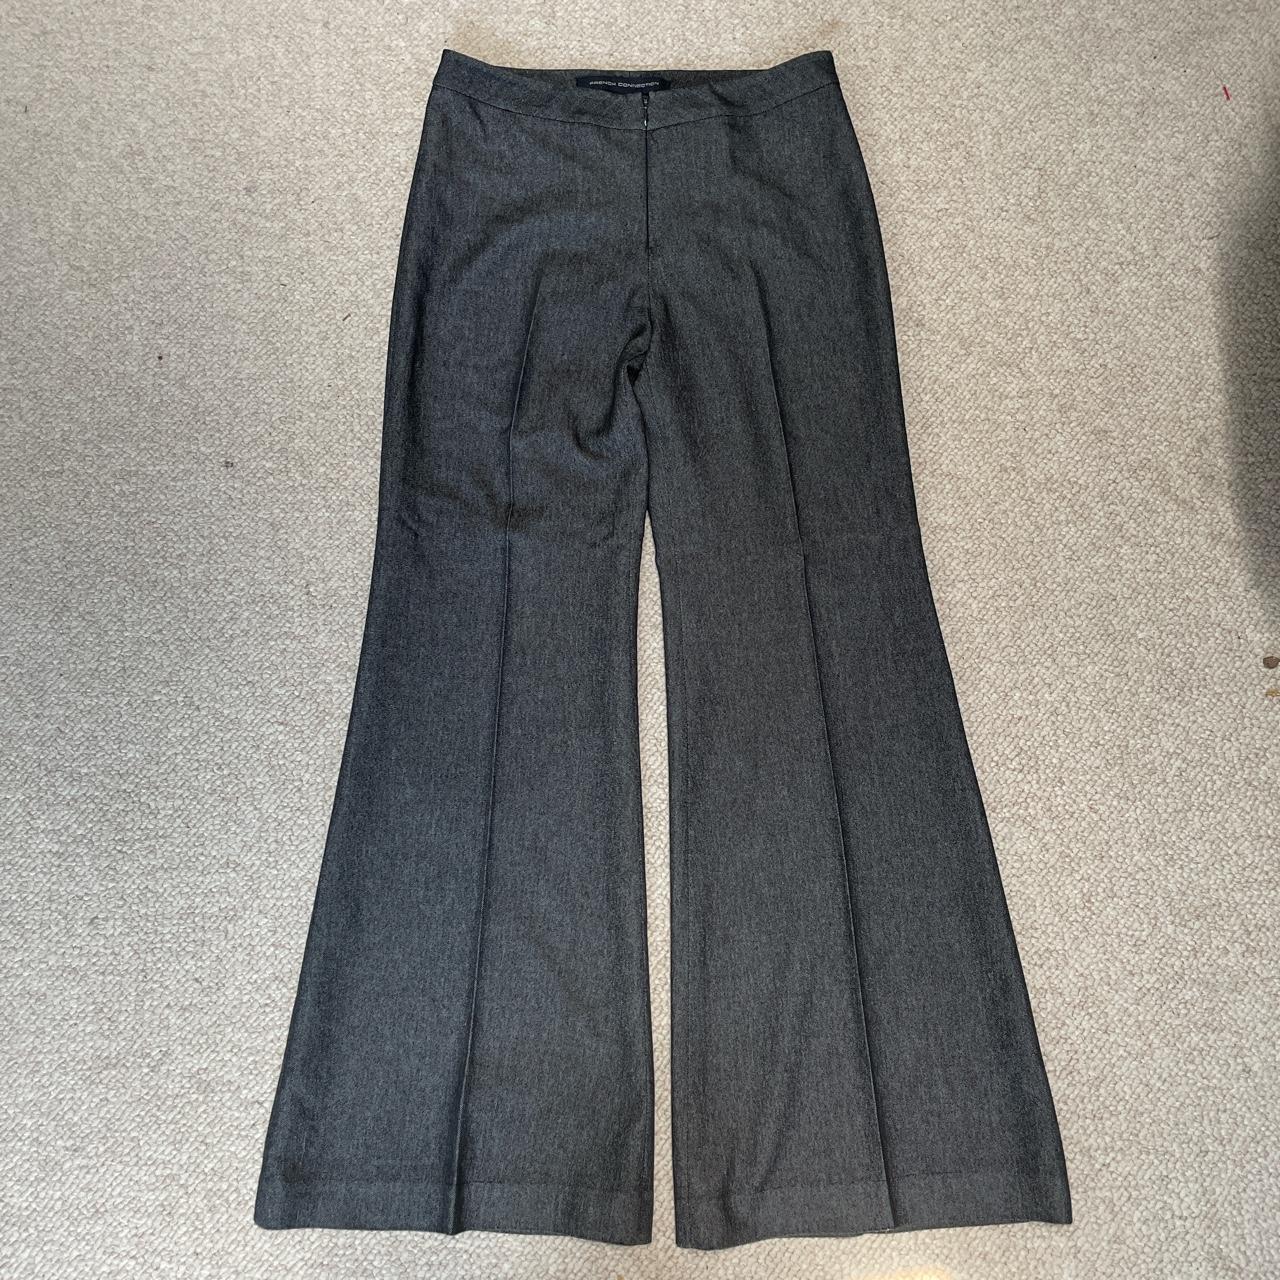 French Connection Women's Grey Trousers | Depop